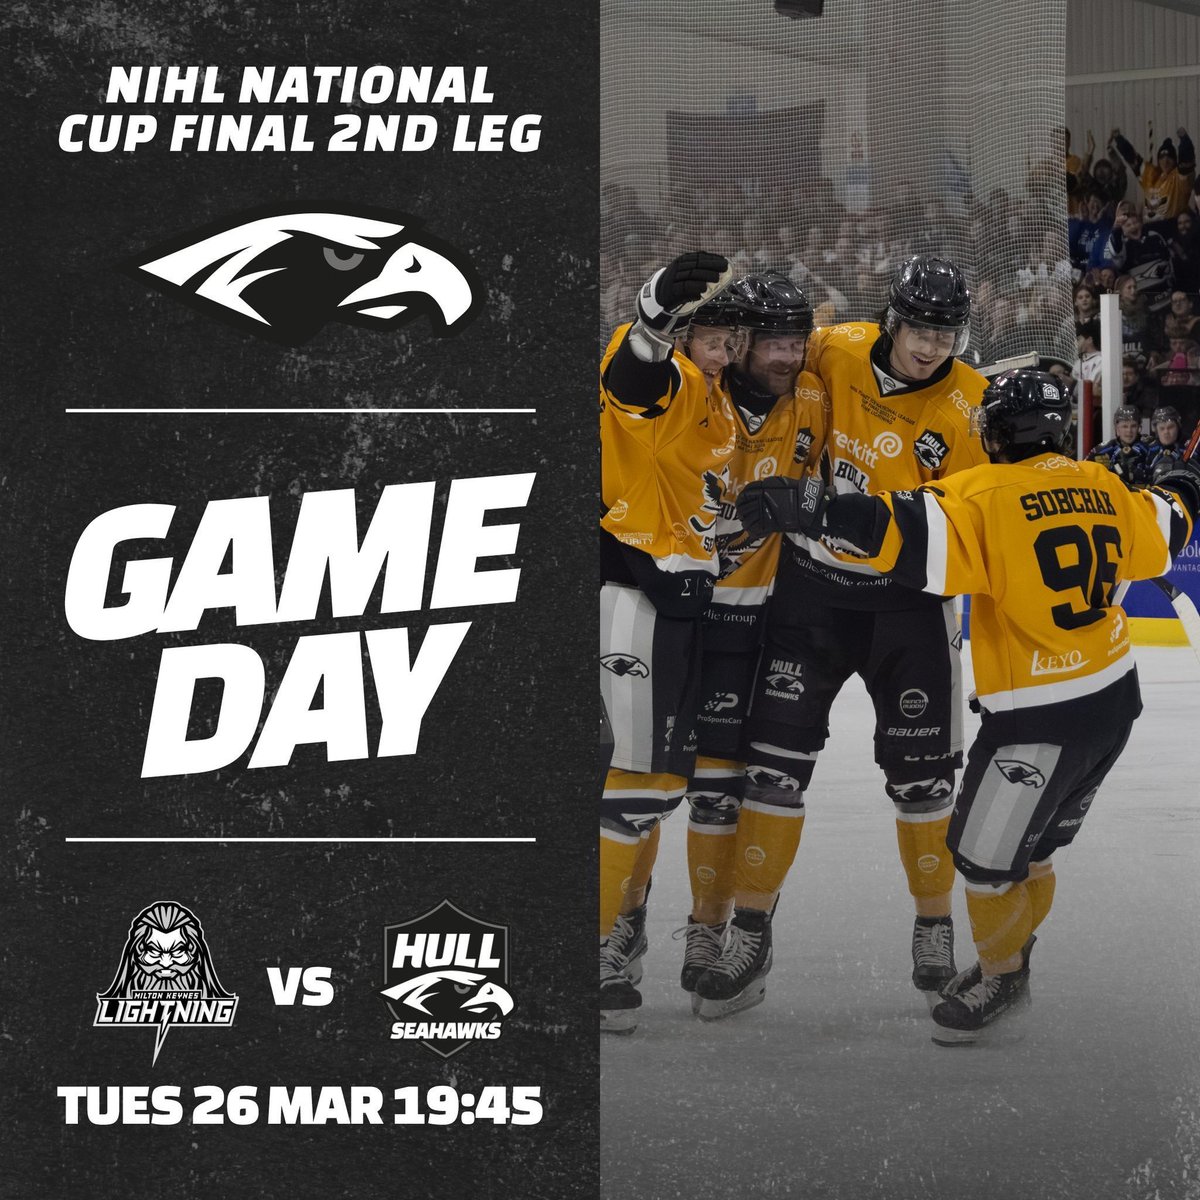 𝗜𝗧𝗦 𝗚𝗔𝗠𝗘 𝗗𝗔𝗬 🦅 The day is here, it’s time for the second leg of the National Cup as we head to MK to take on the Lightning ! COME ON YOU ‘ULLLLLLLLL💪🏼